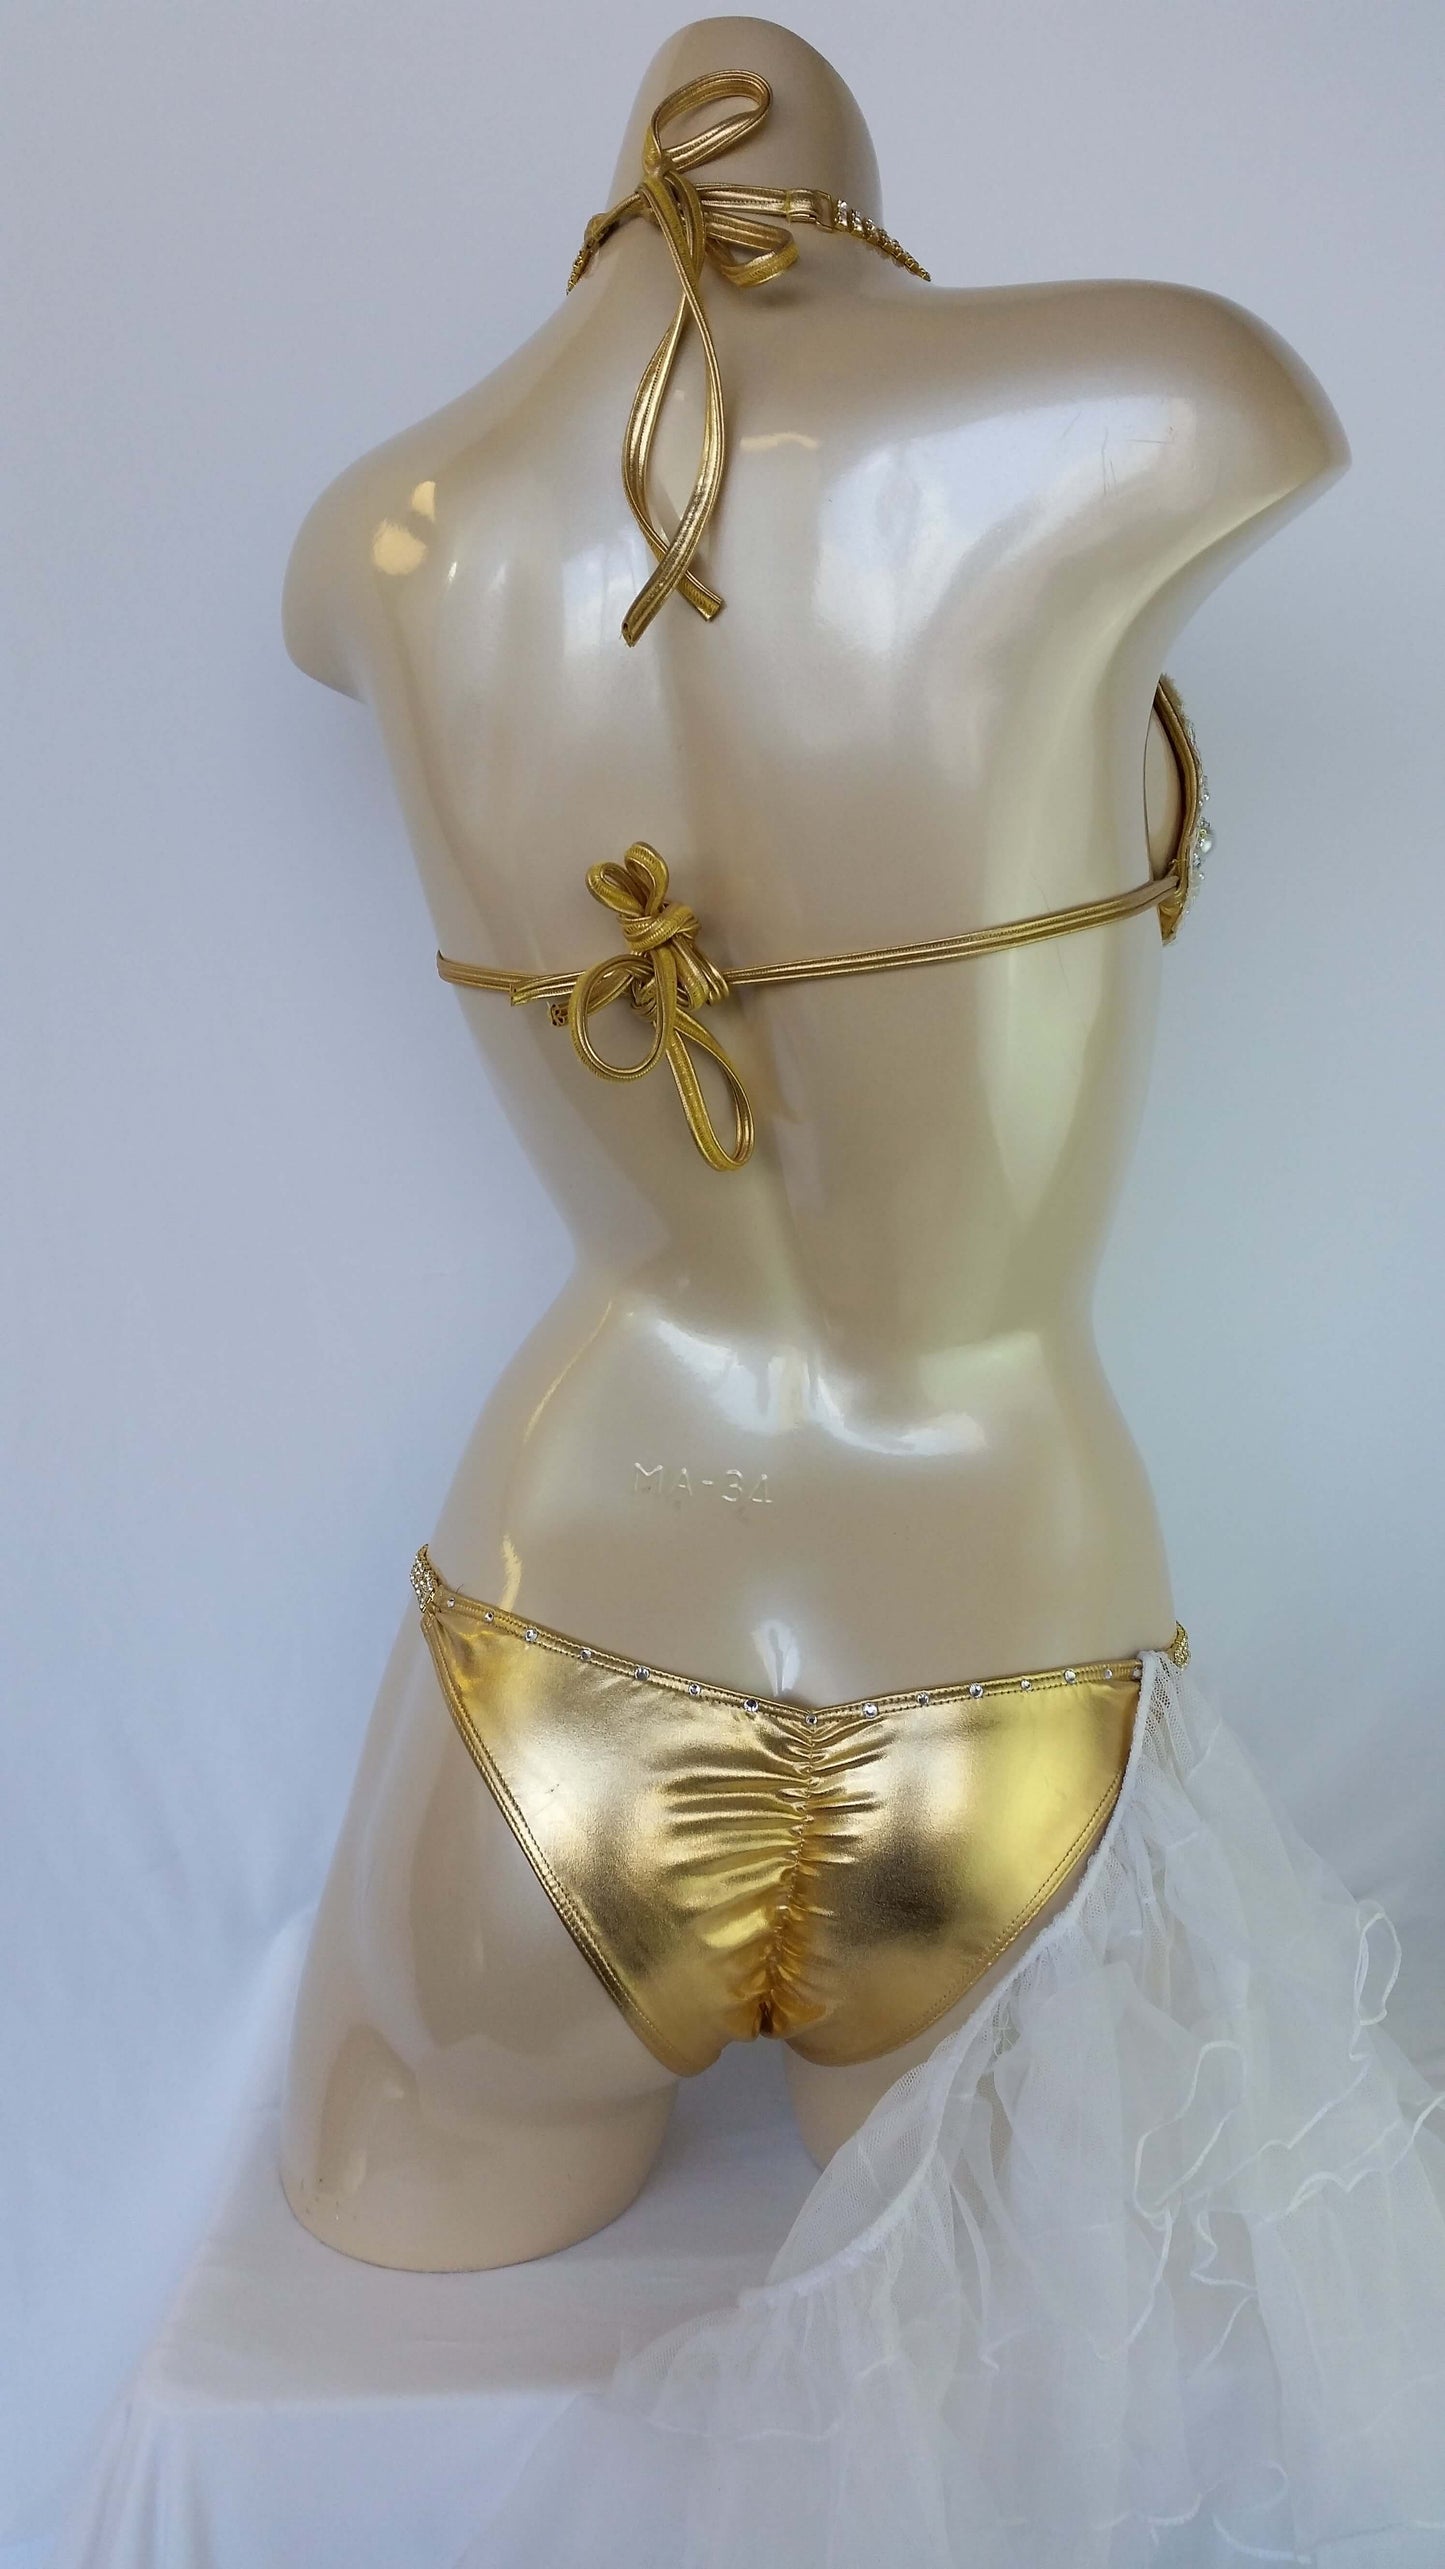 Gold bikini with embroidered wedding lace, crystals and costume pearls design